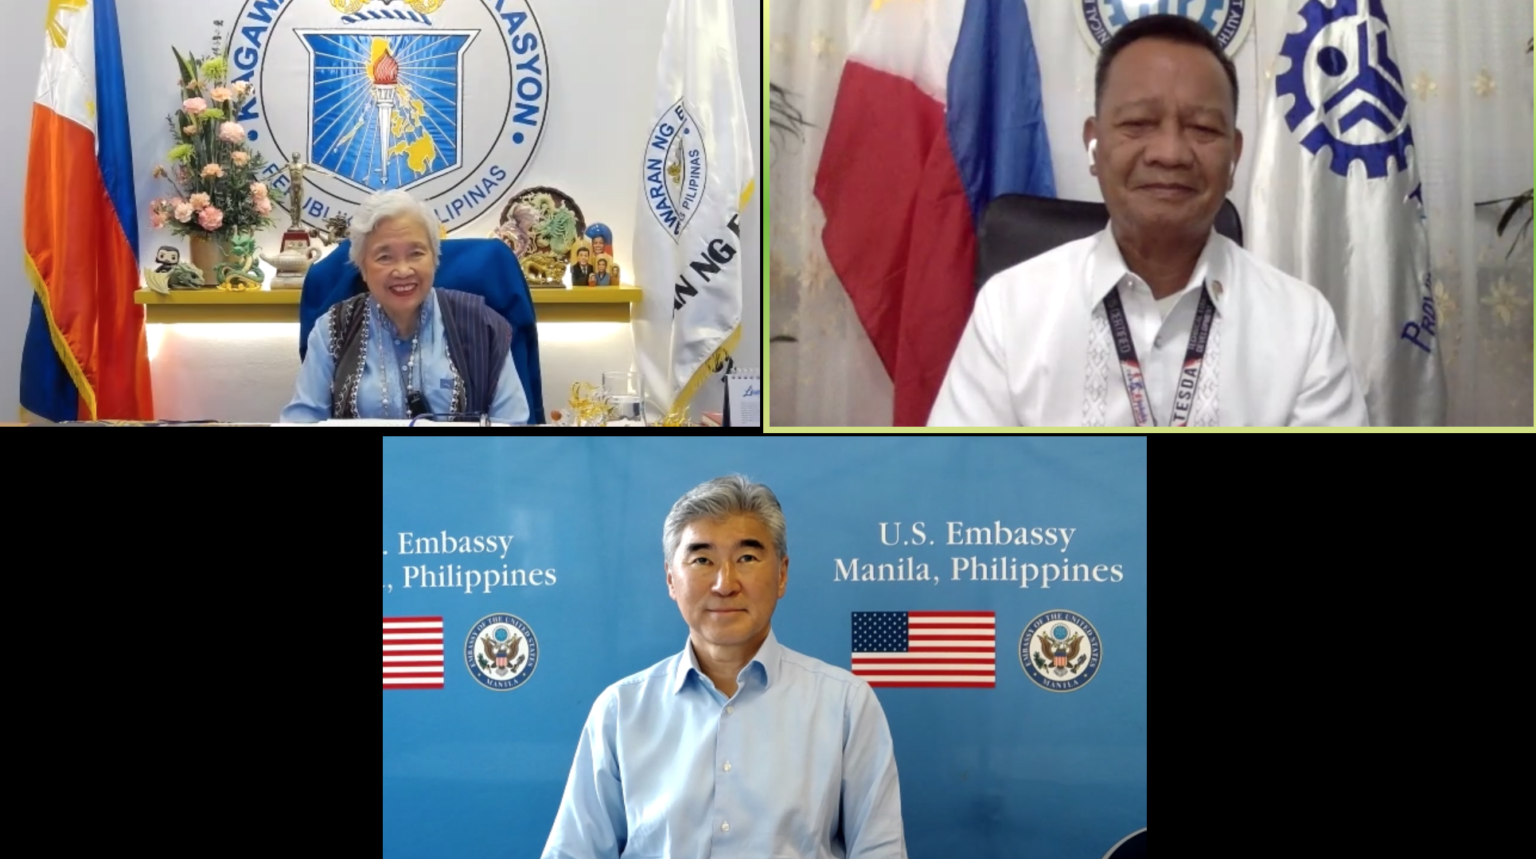 unicef Archives - U.S. Embassy in the Philippines